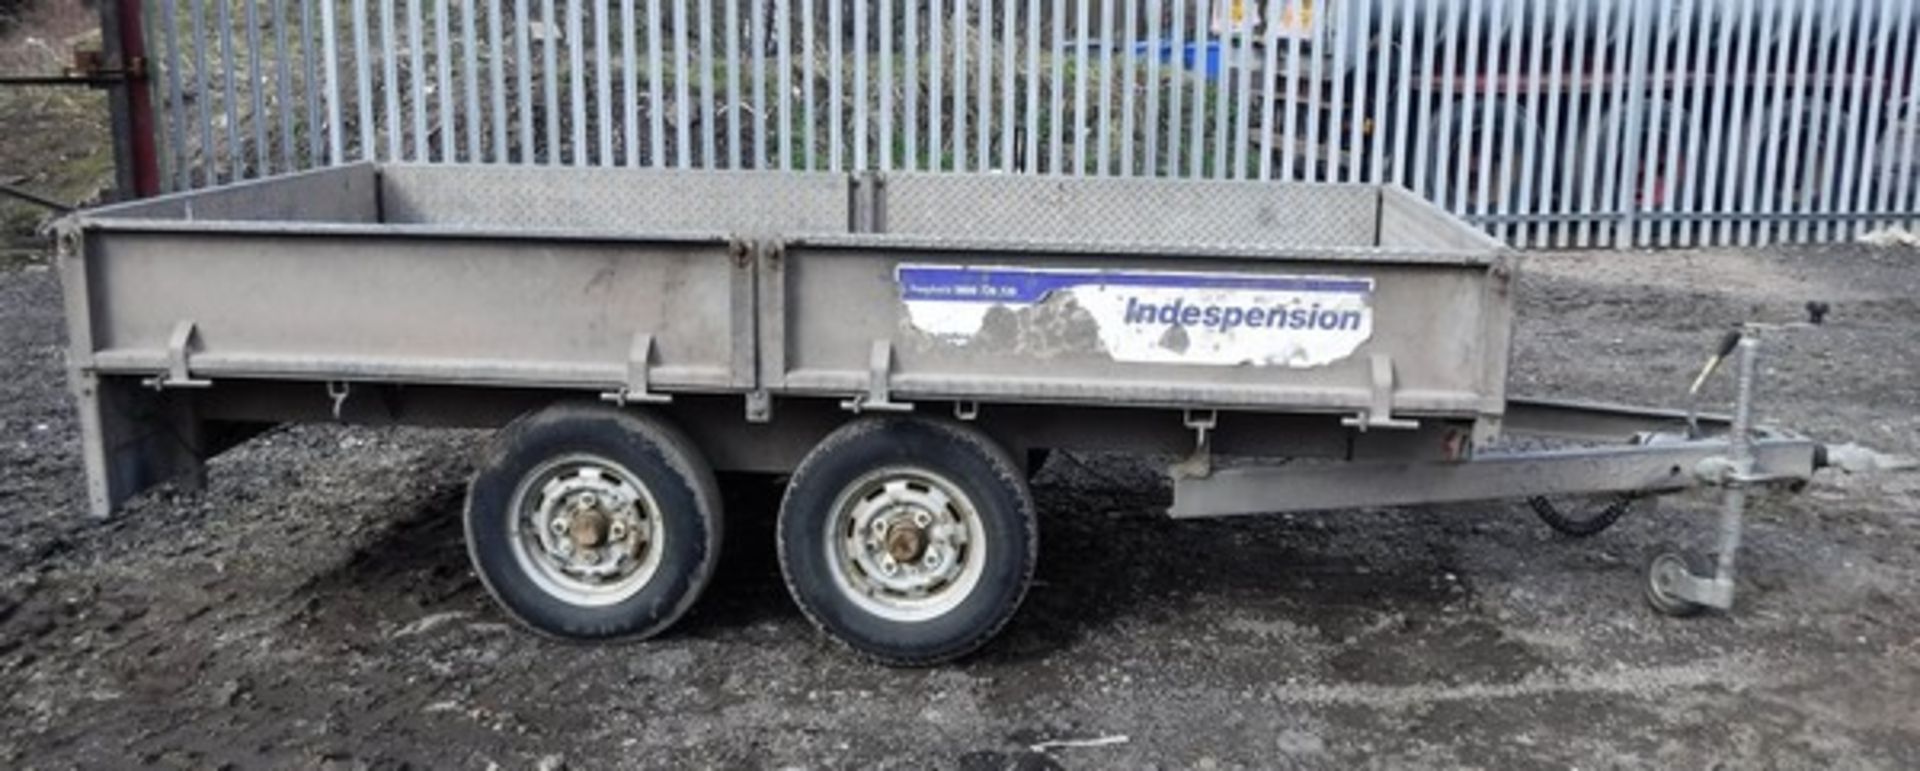 INDESPENSION TRAILER, 10FT X 5FT, WITH RAMPS, ASSET - 758-4028